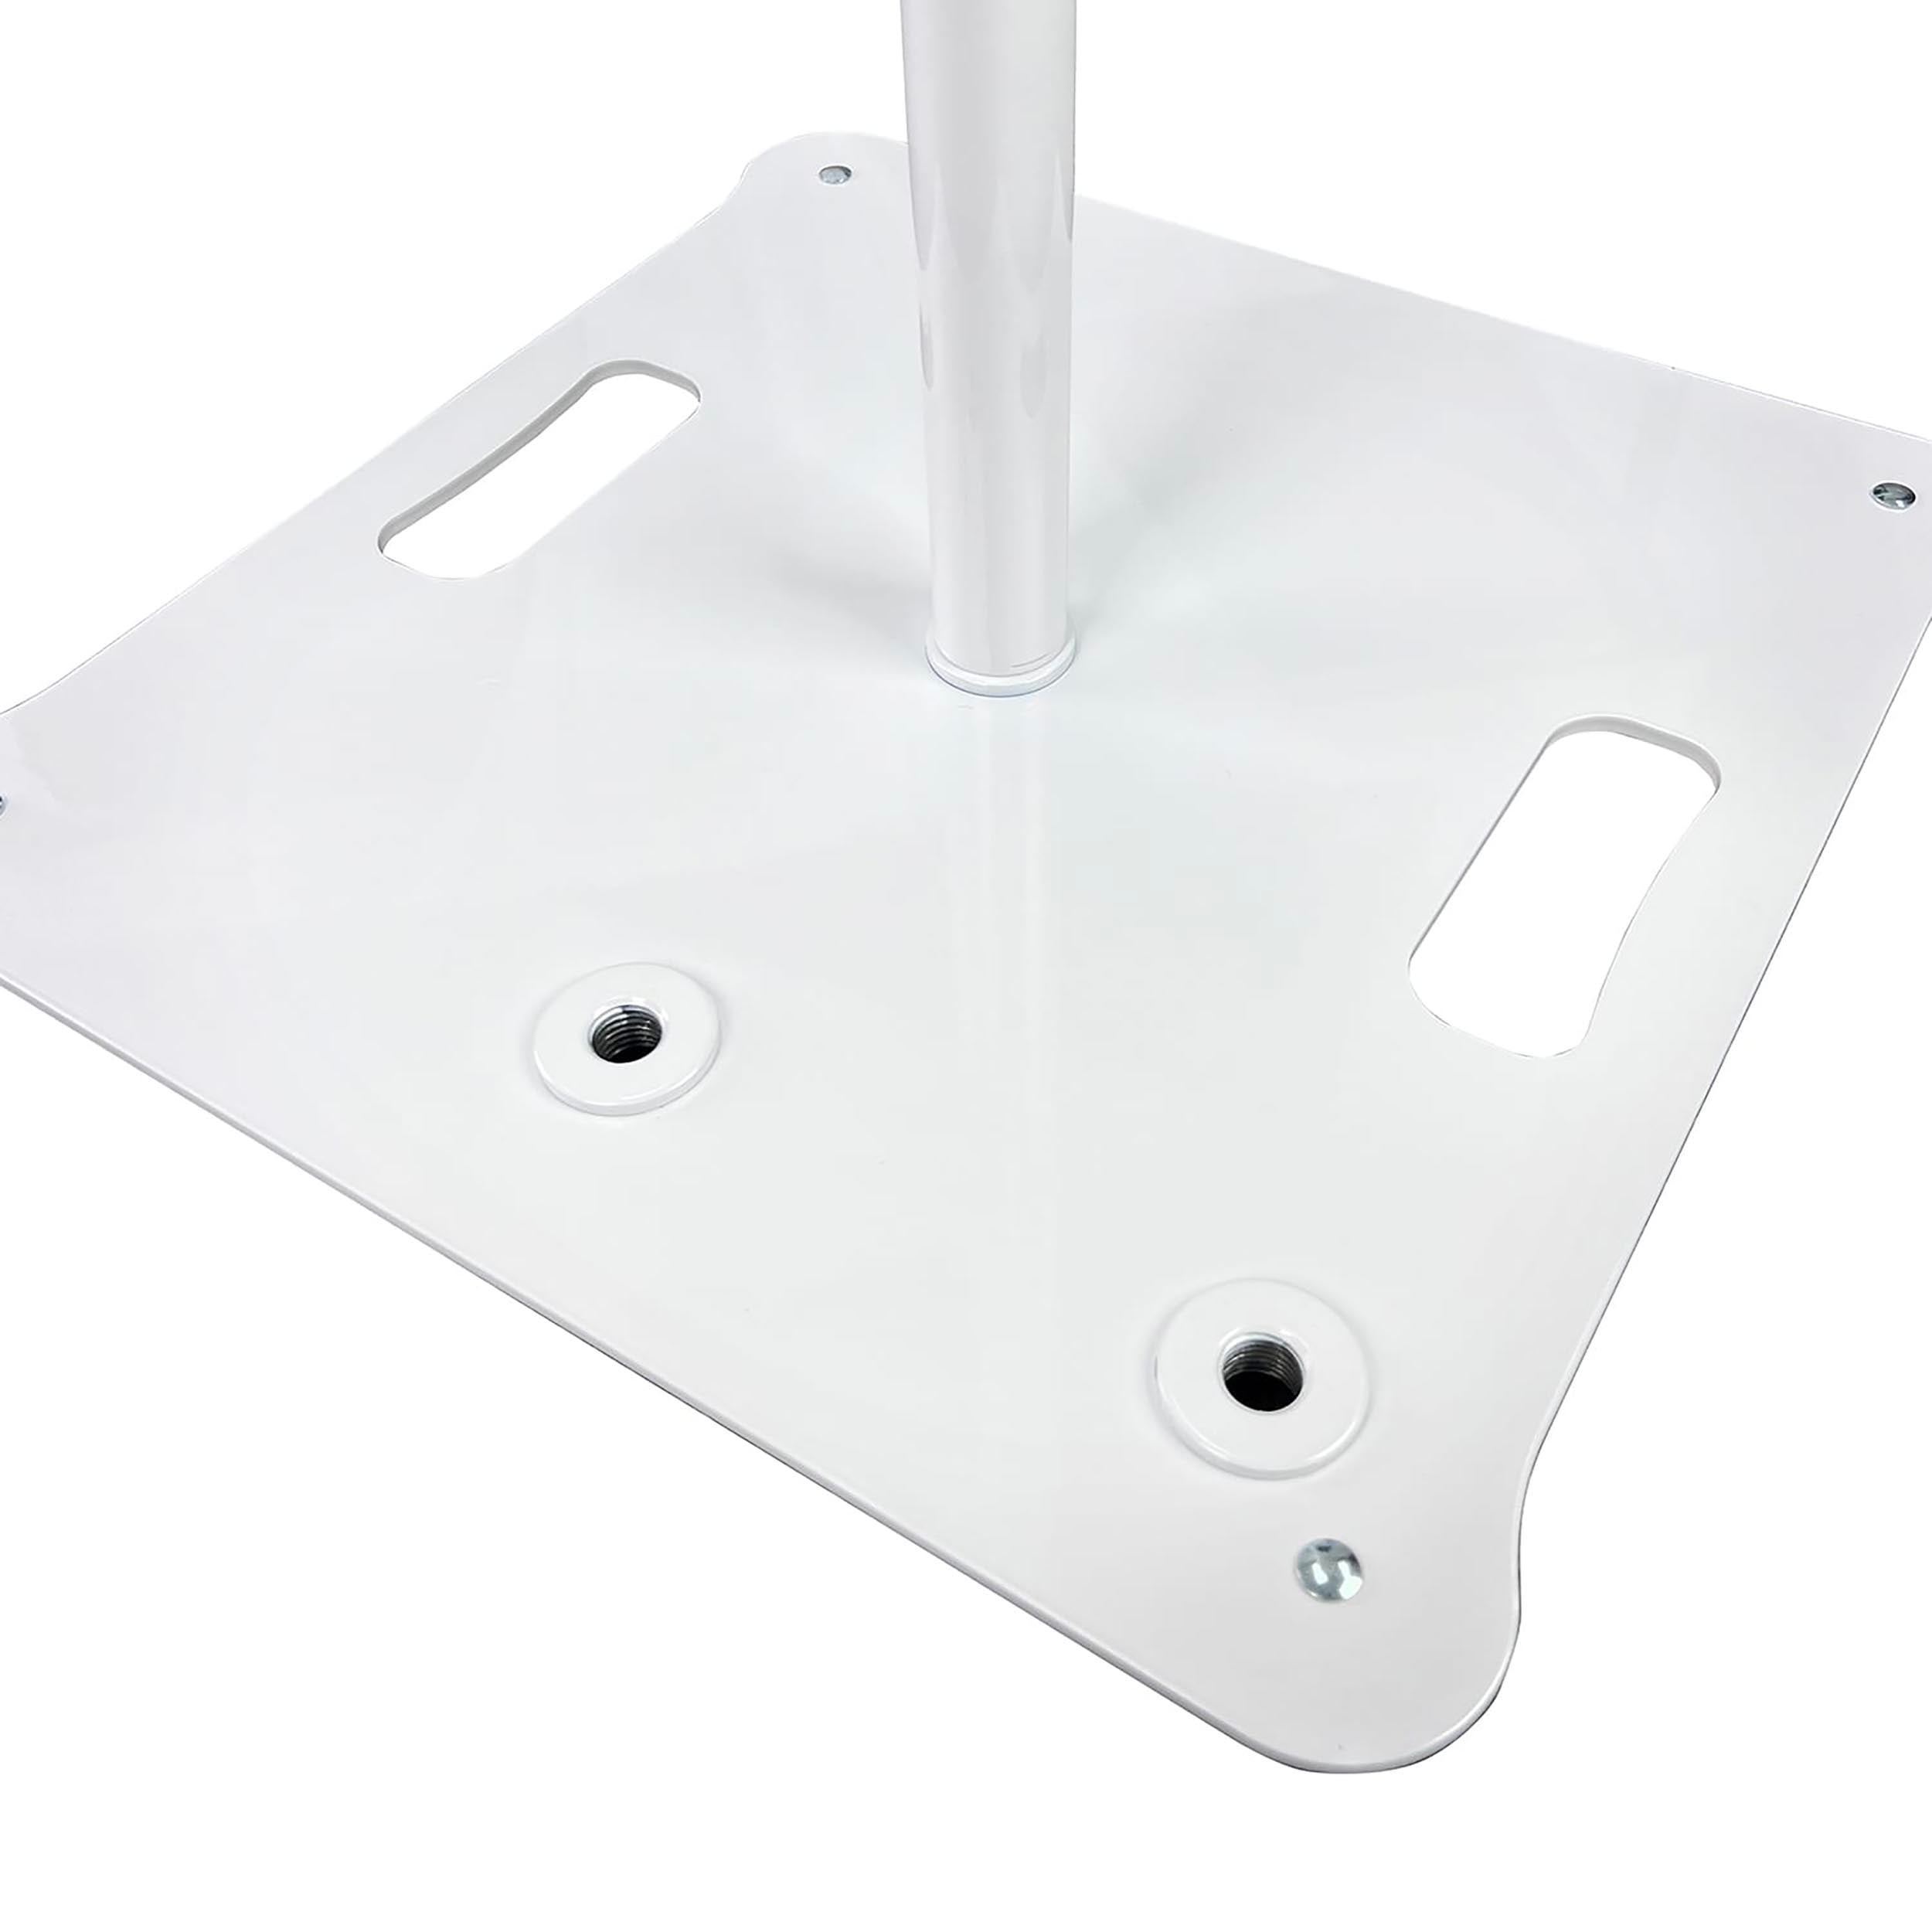 Odyssey LSBP72WHT, 72-Inch Tall White Speaker Stands - Pair by Odyssey